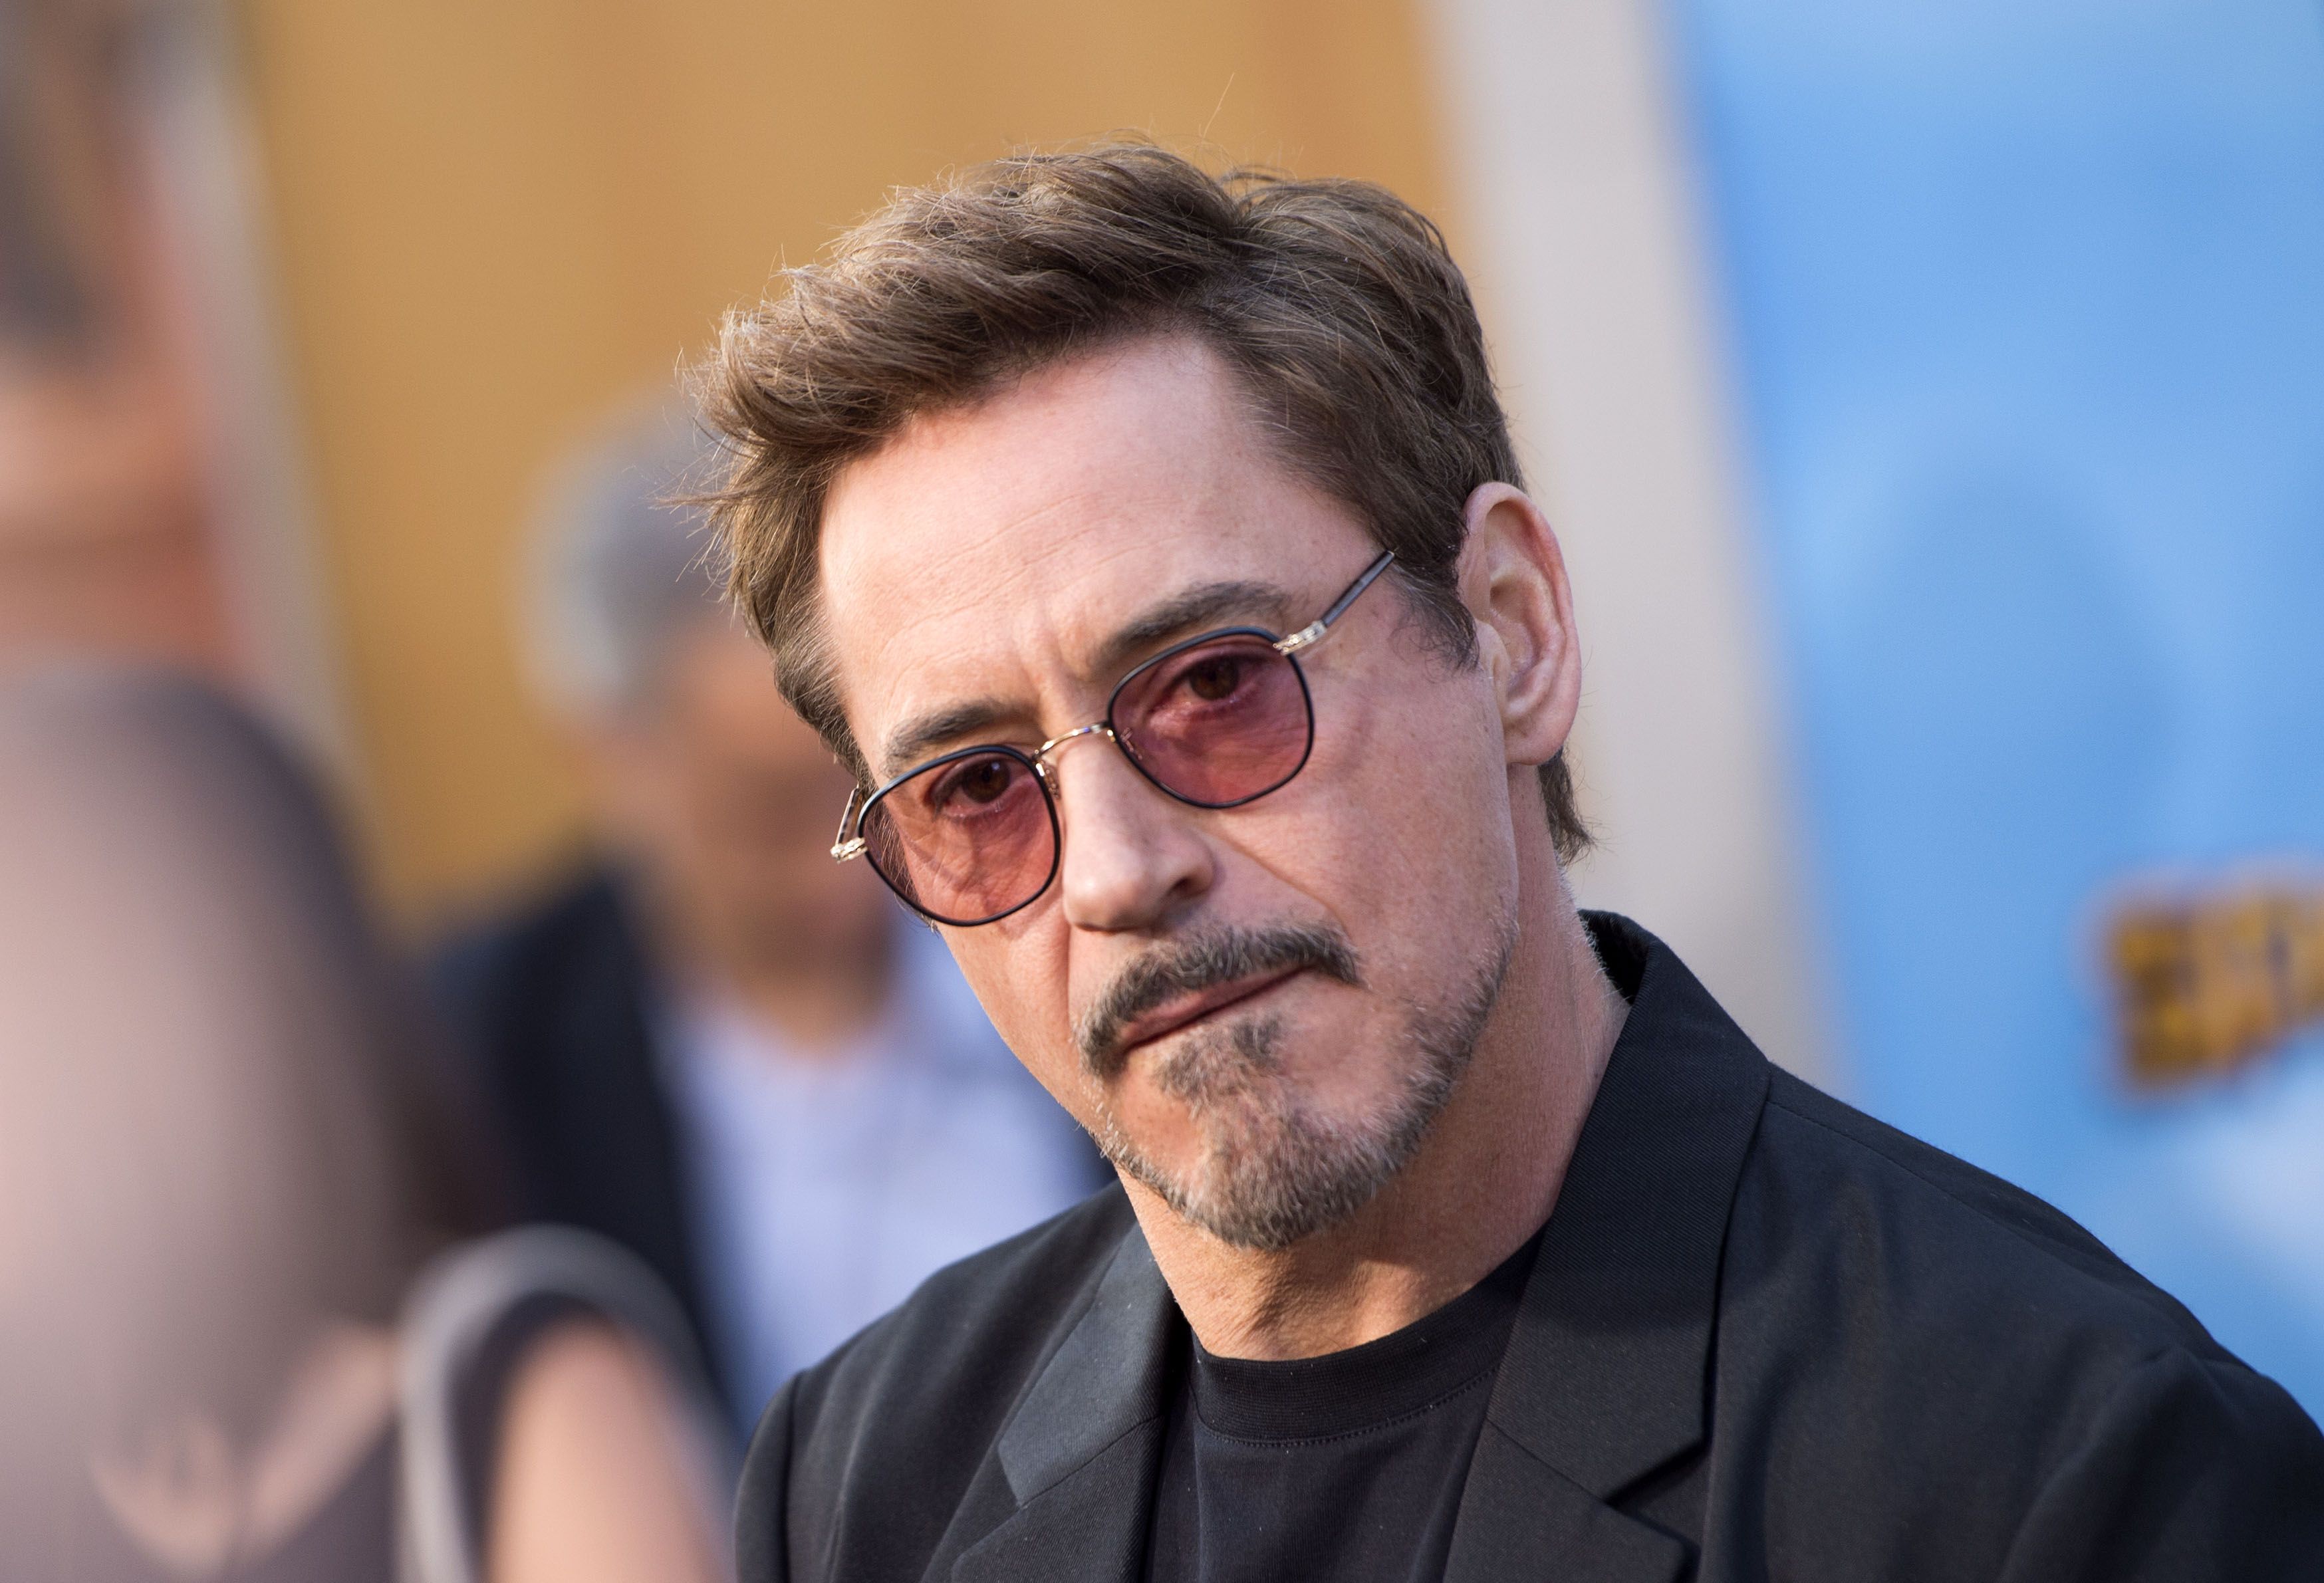 Robert Downey Jr. in his first post-Avengers project is surrounded by animals